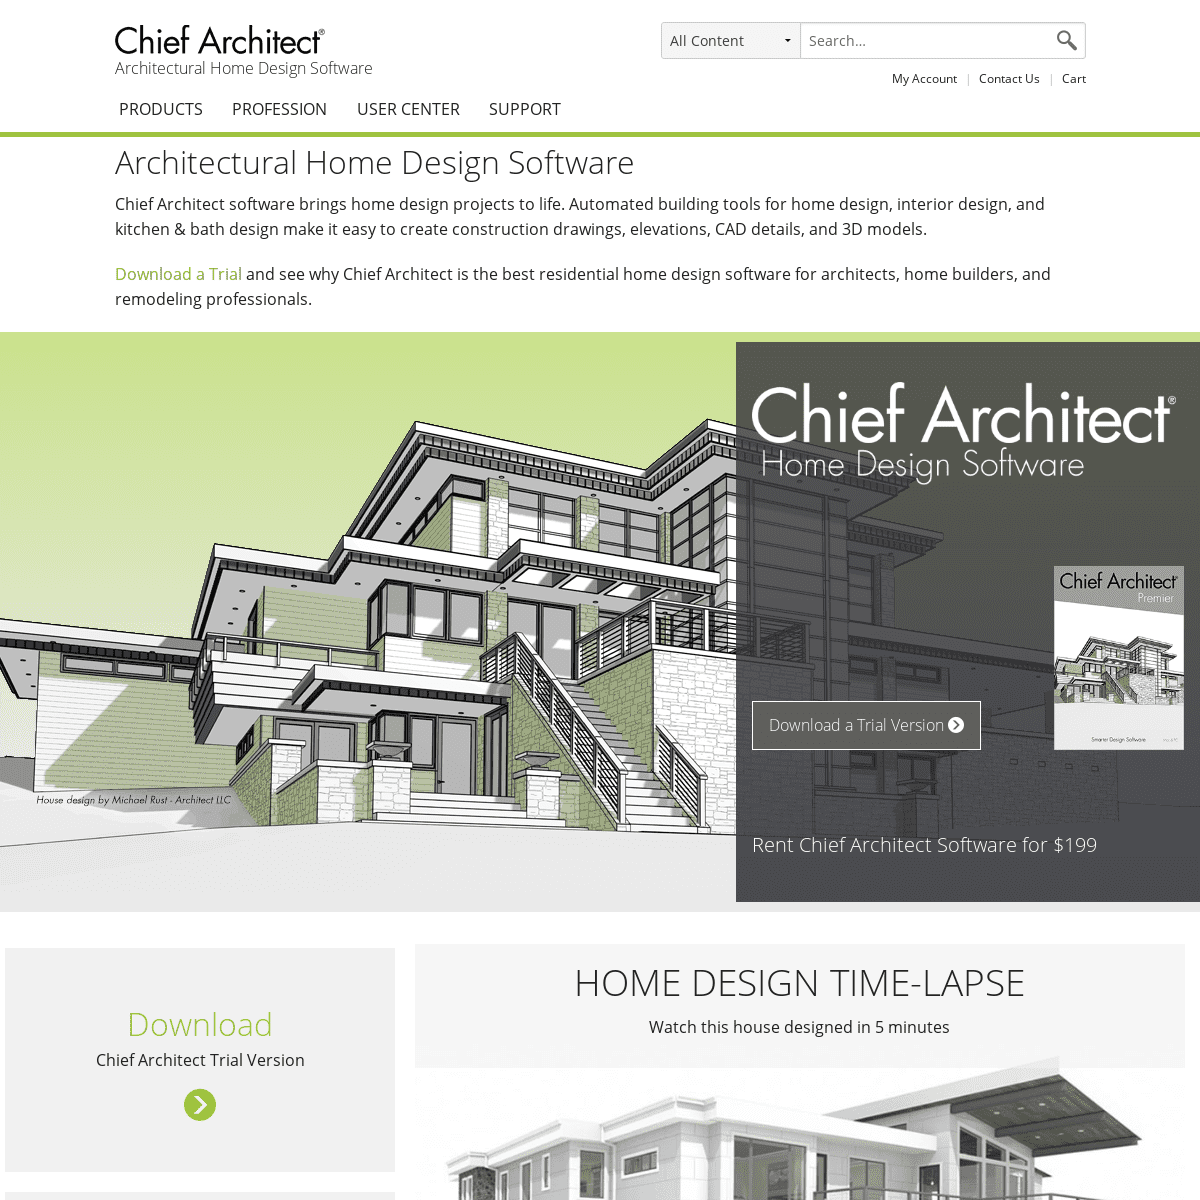 A complete backup of chiefarchitect.com